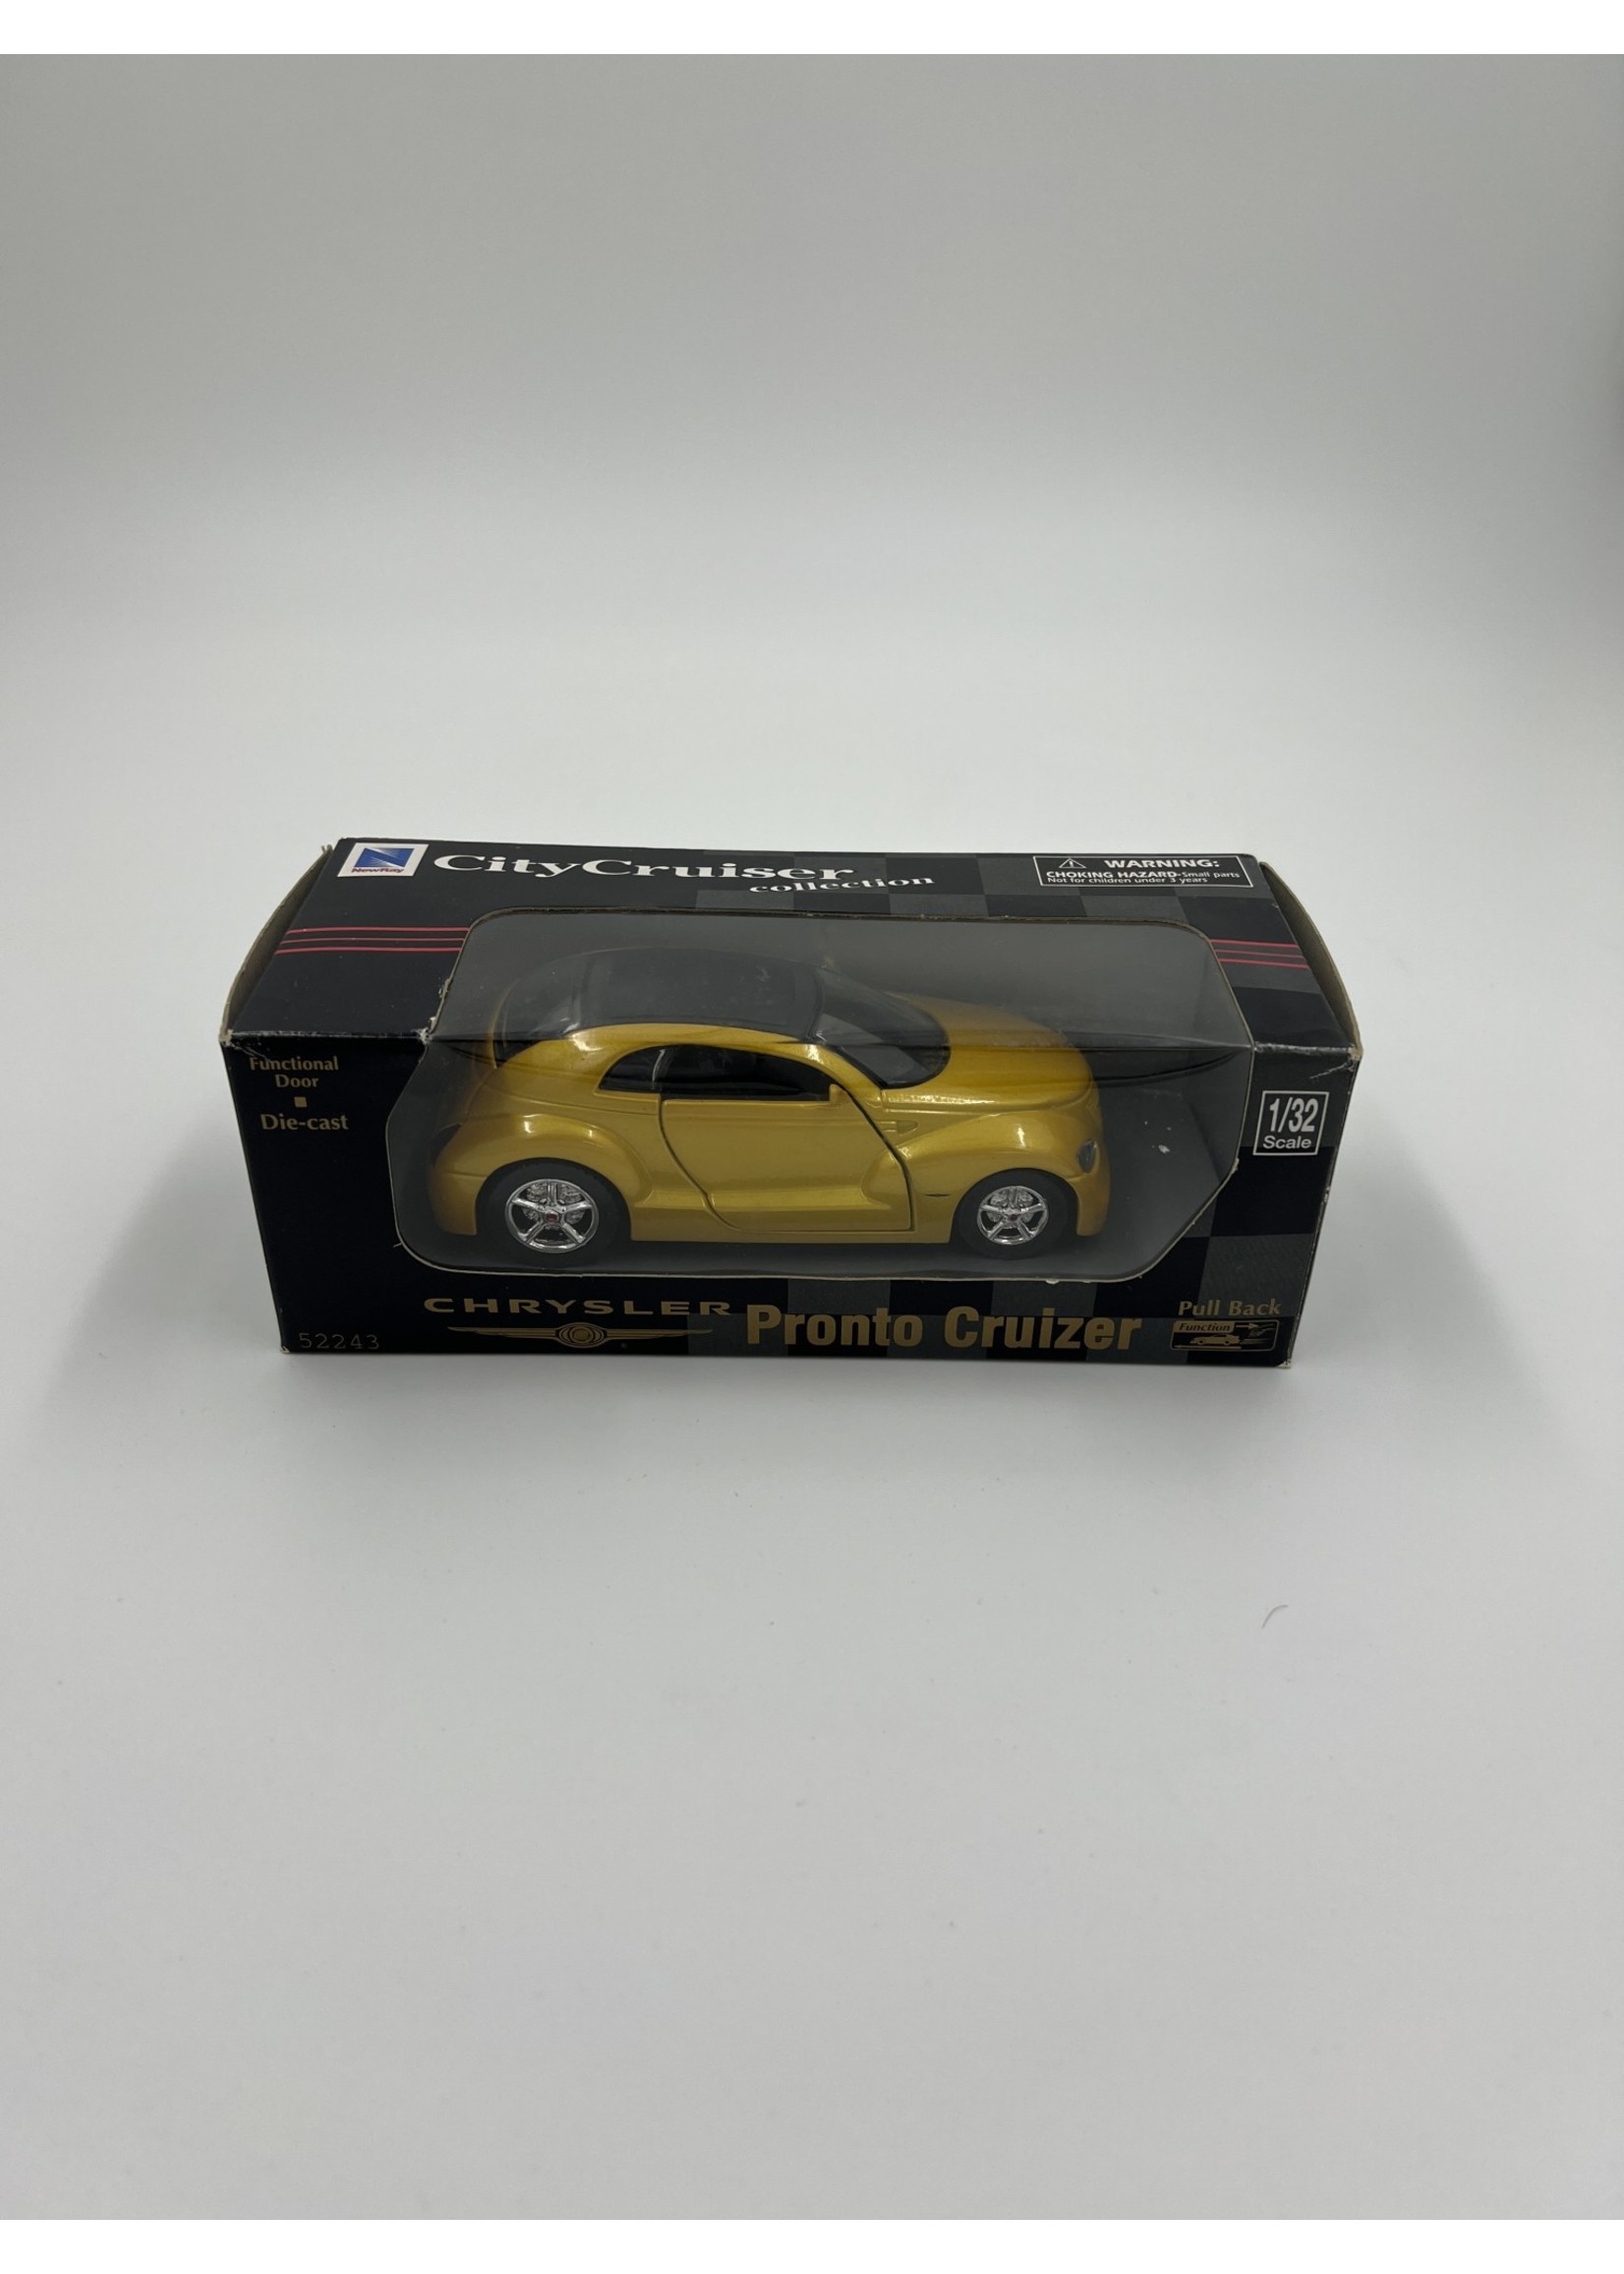 Die Cast Pronto Cruizer City Cruiser Collection 1:32 Scale